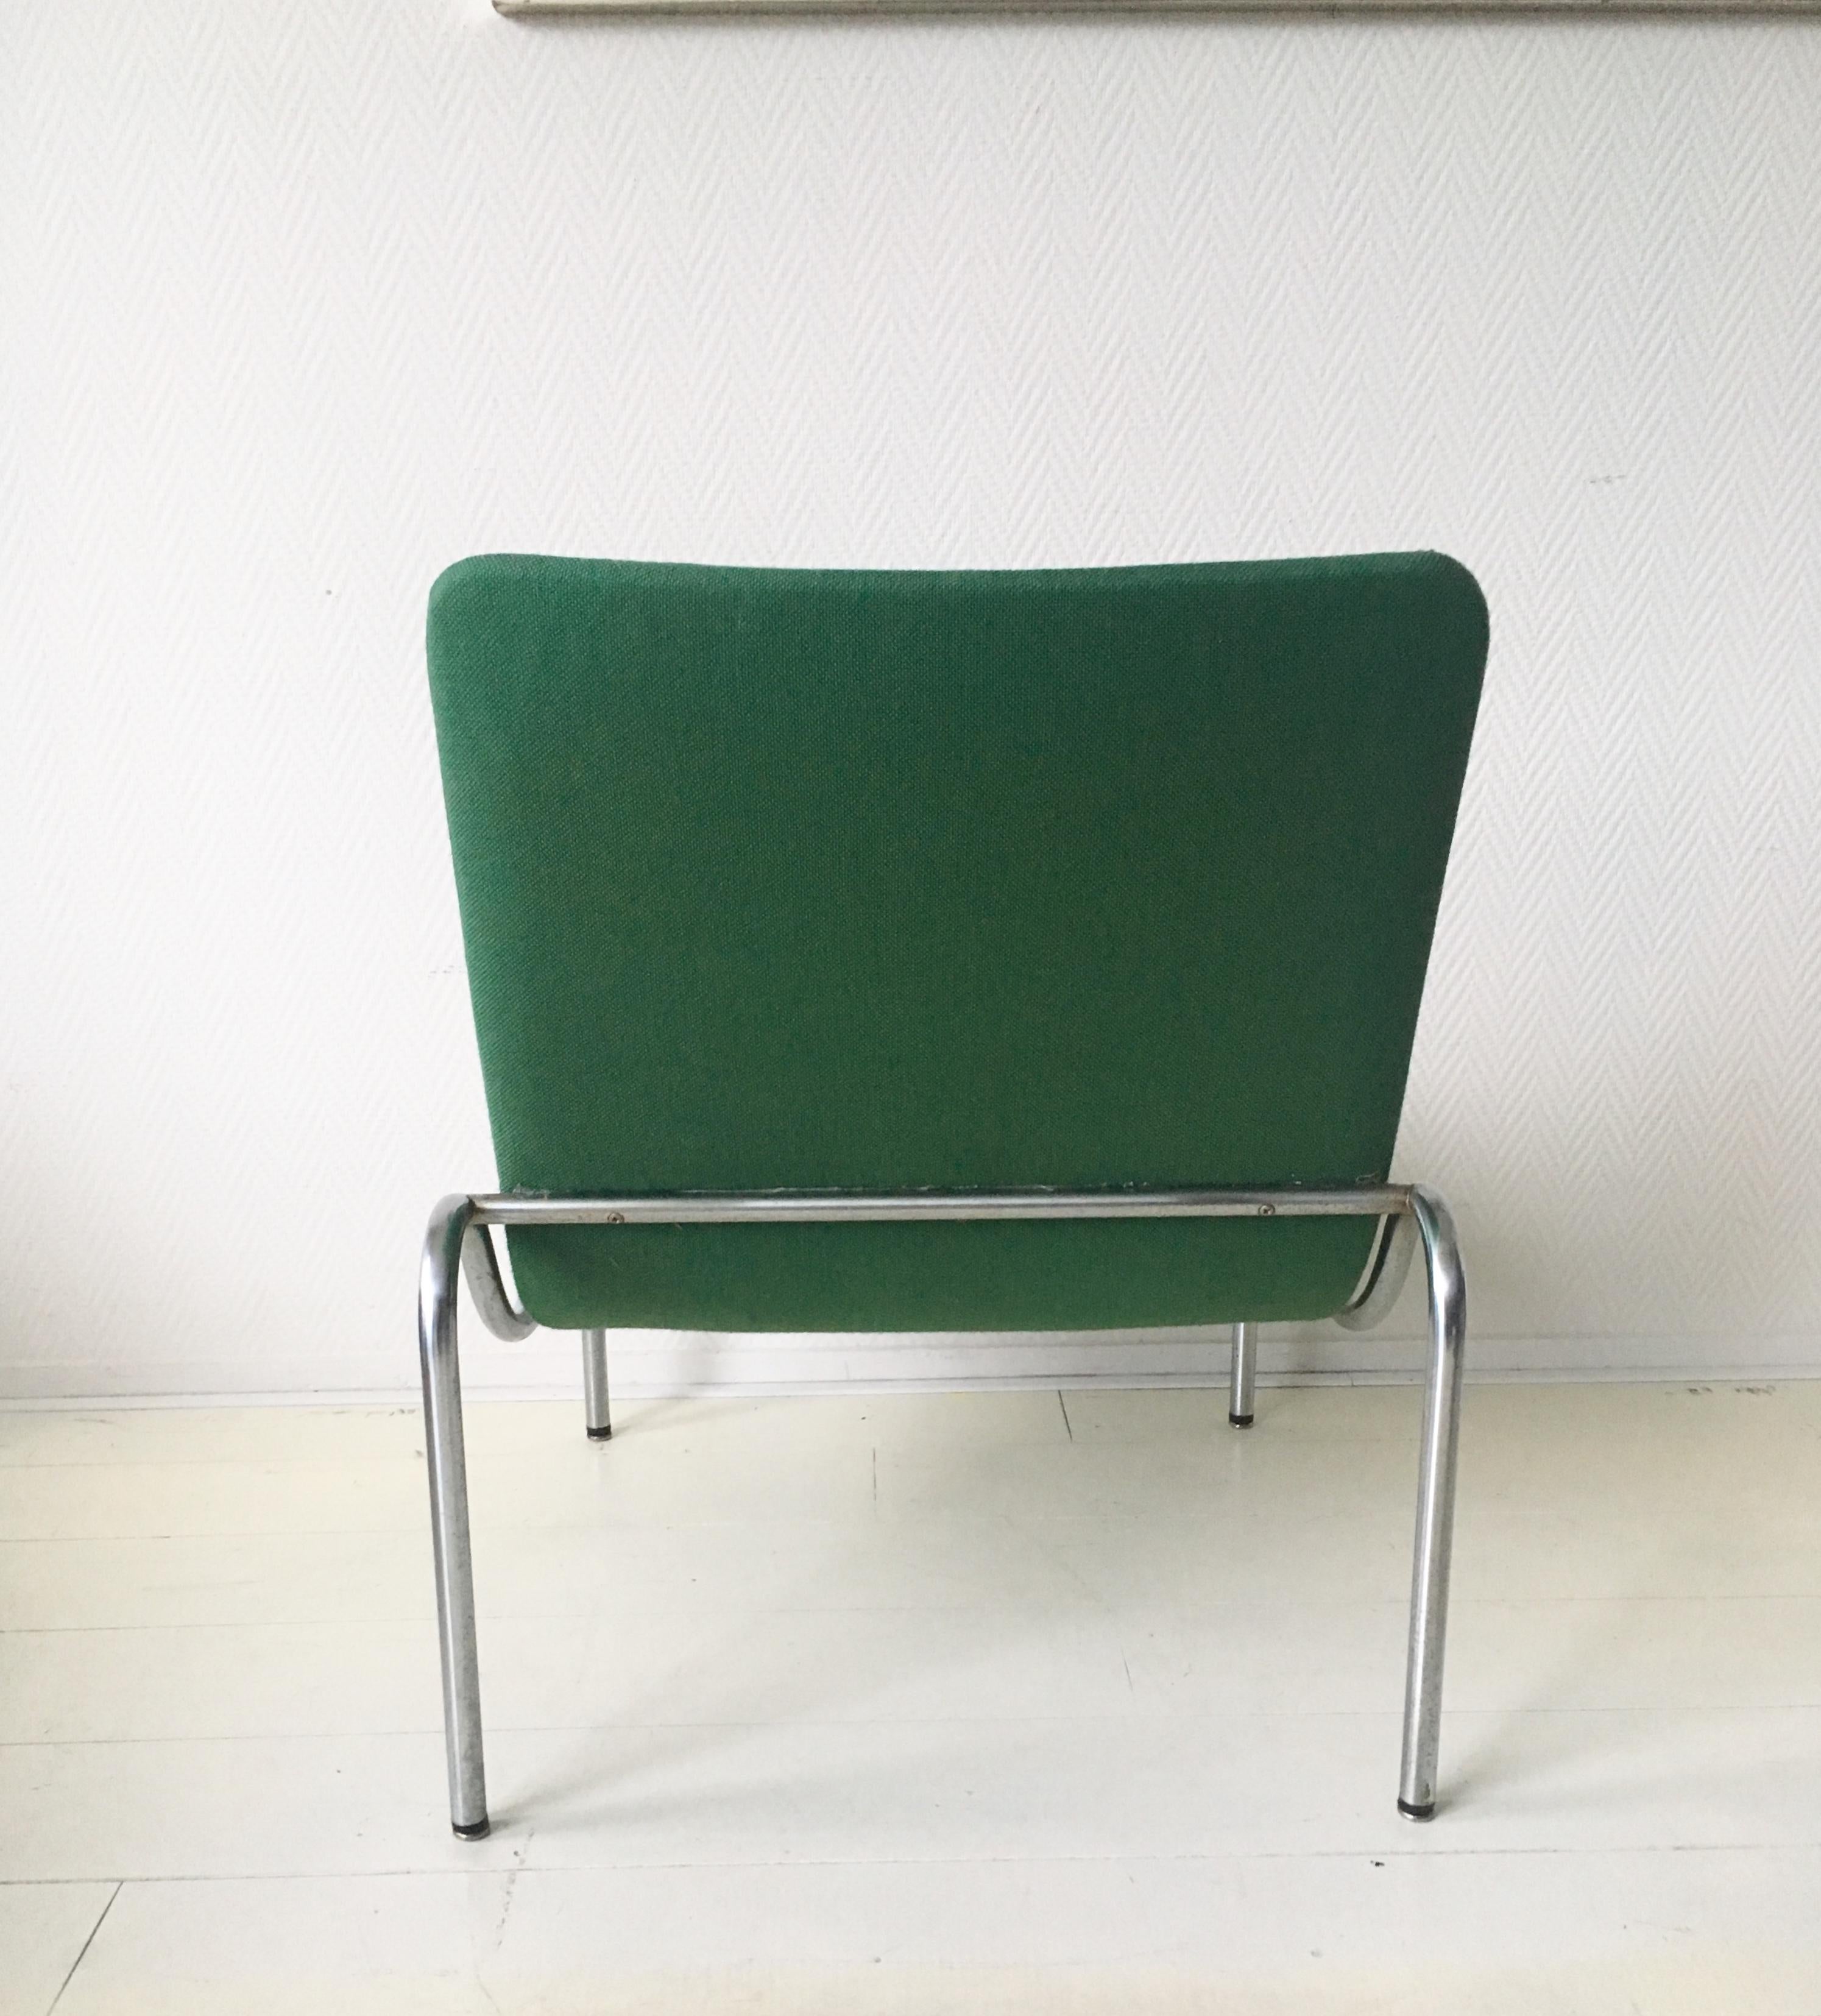 20th Century Green Tubular Lounge Chair by Kho Liang Ie for Stabin Holland, Model 703, 1968 For Sale